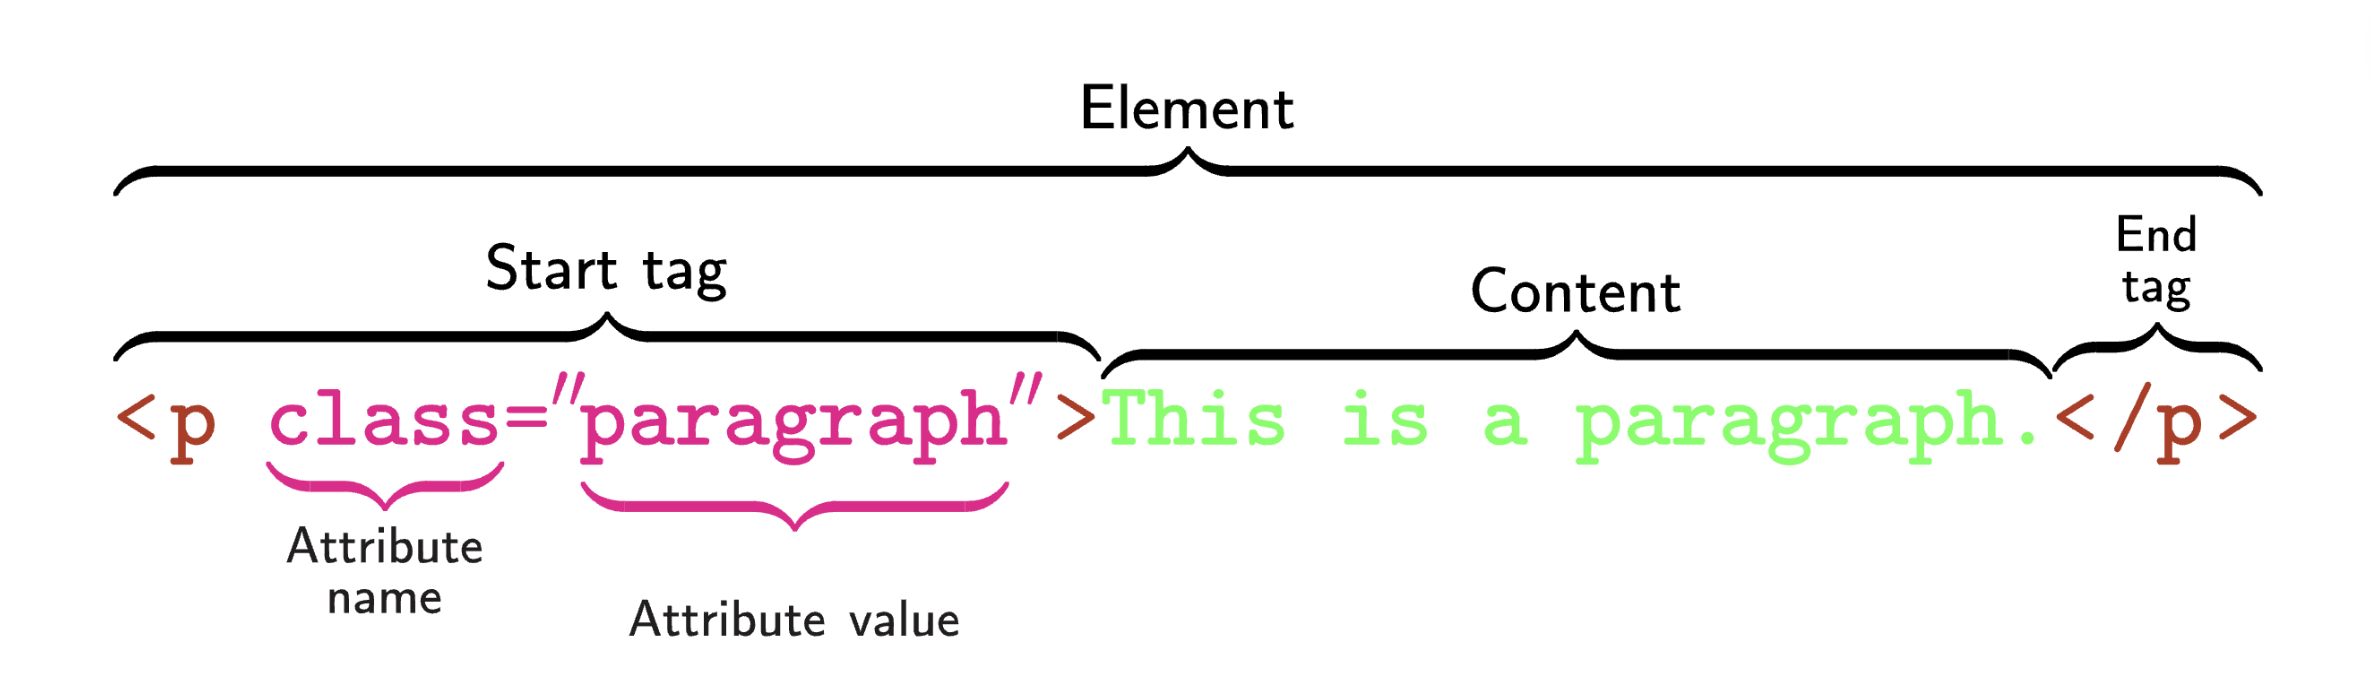 A diagram that breaks down HTML elements for web scraping